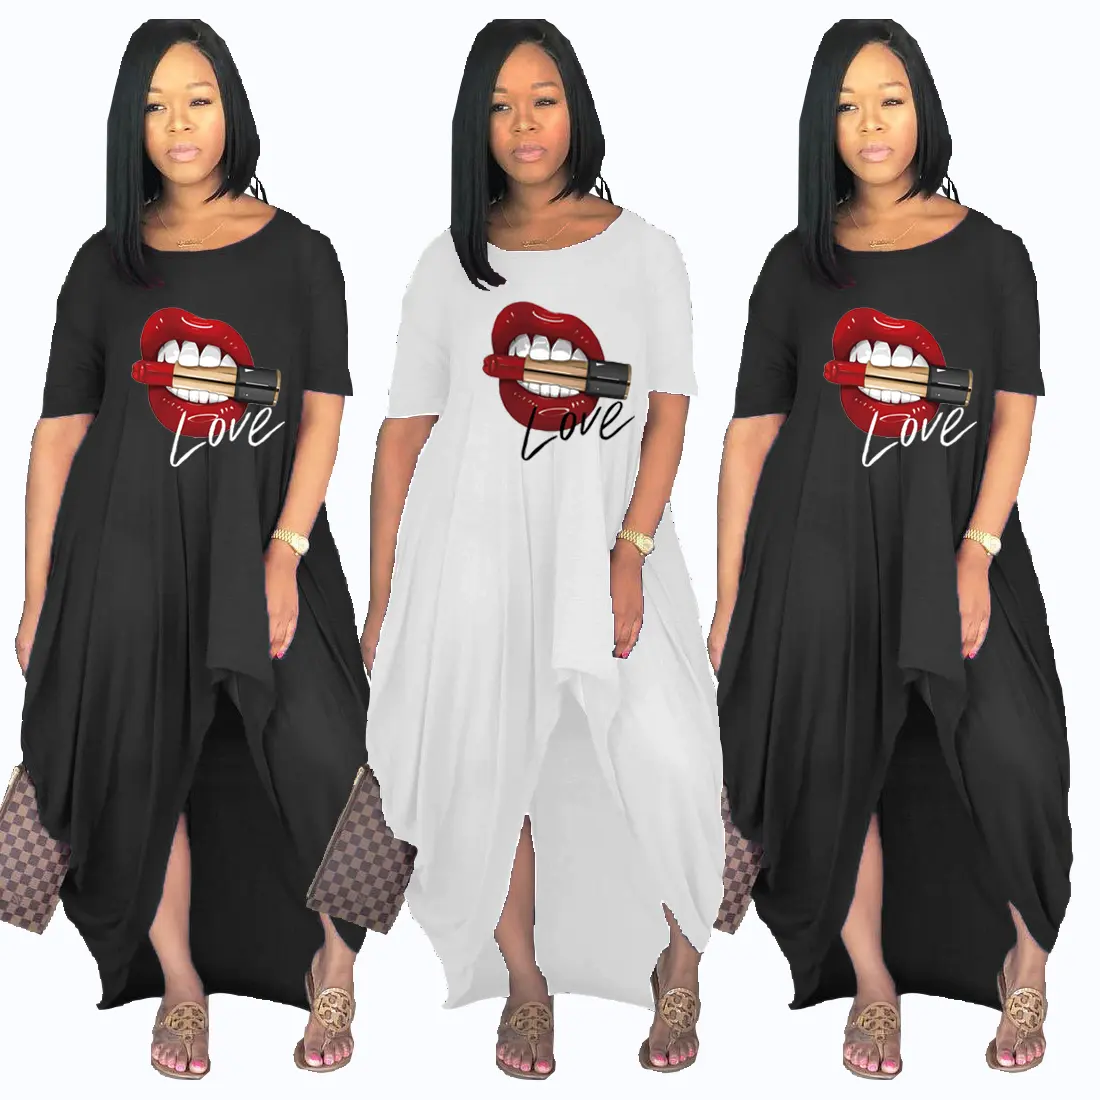 2022 Trend Summer Maxi Dresses Women Lovely Casual O Neck Love Lip Print Loose Fit Ankle Length Plus Size Dress